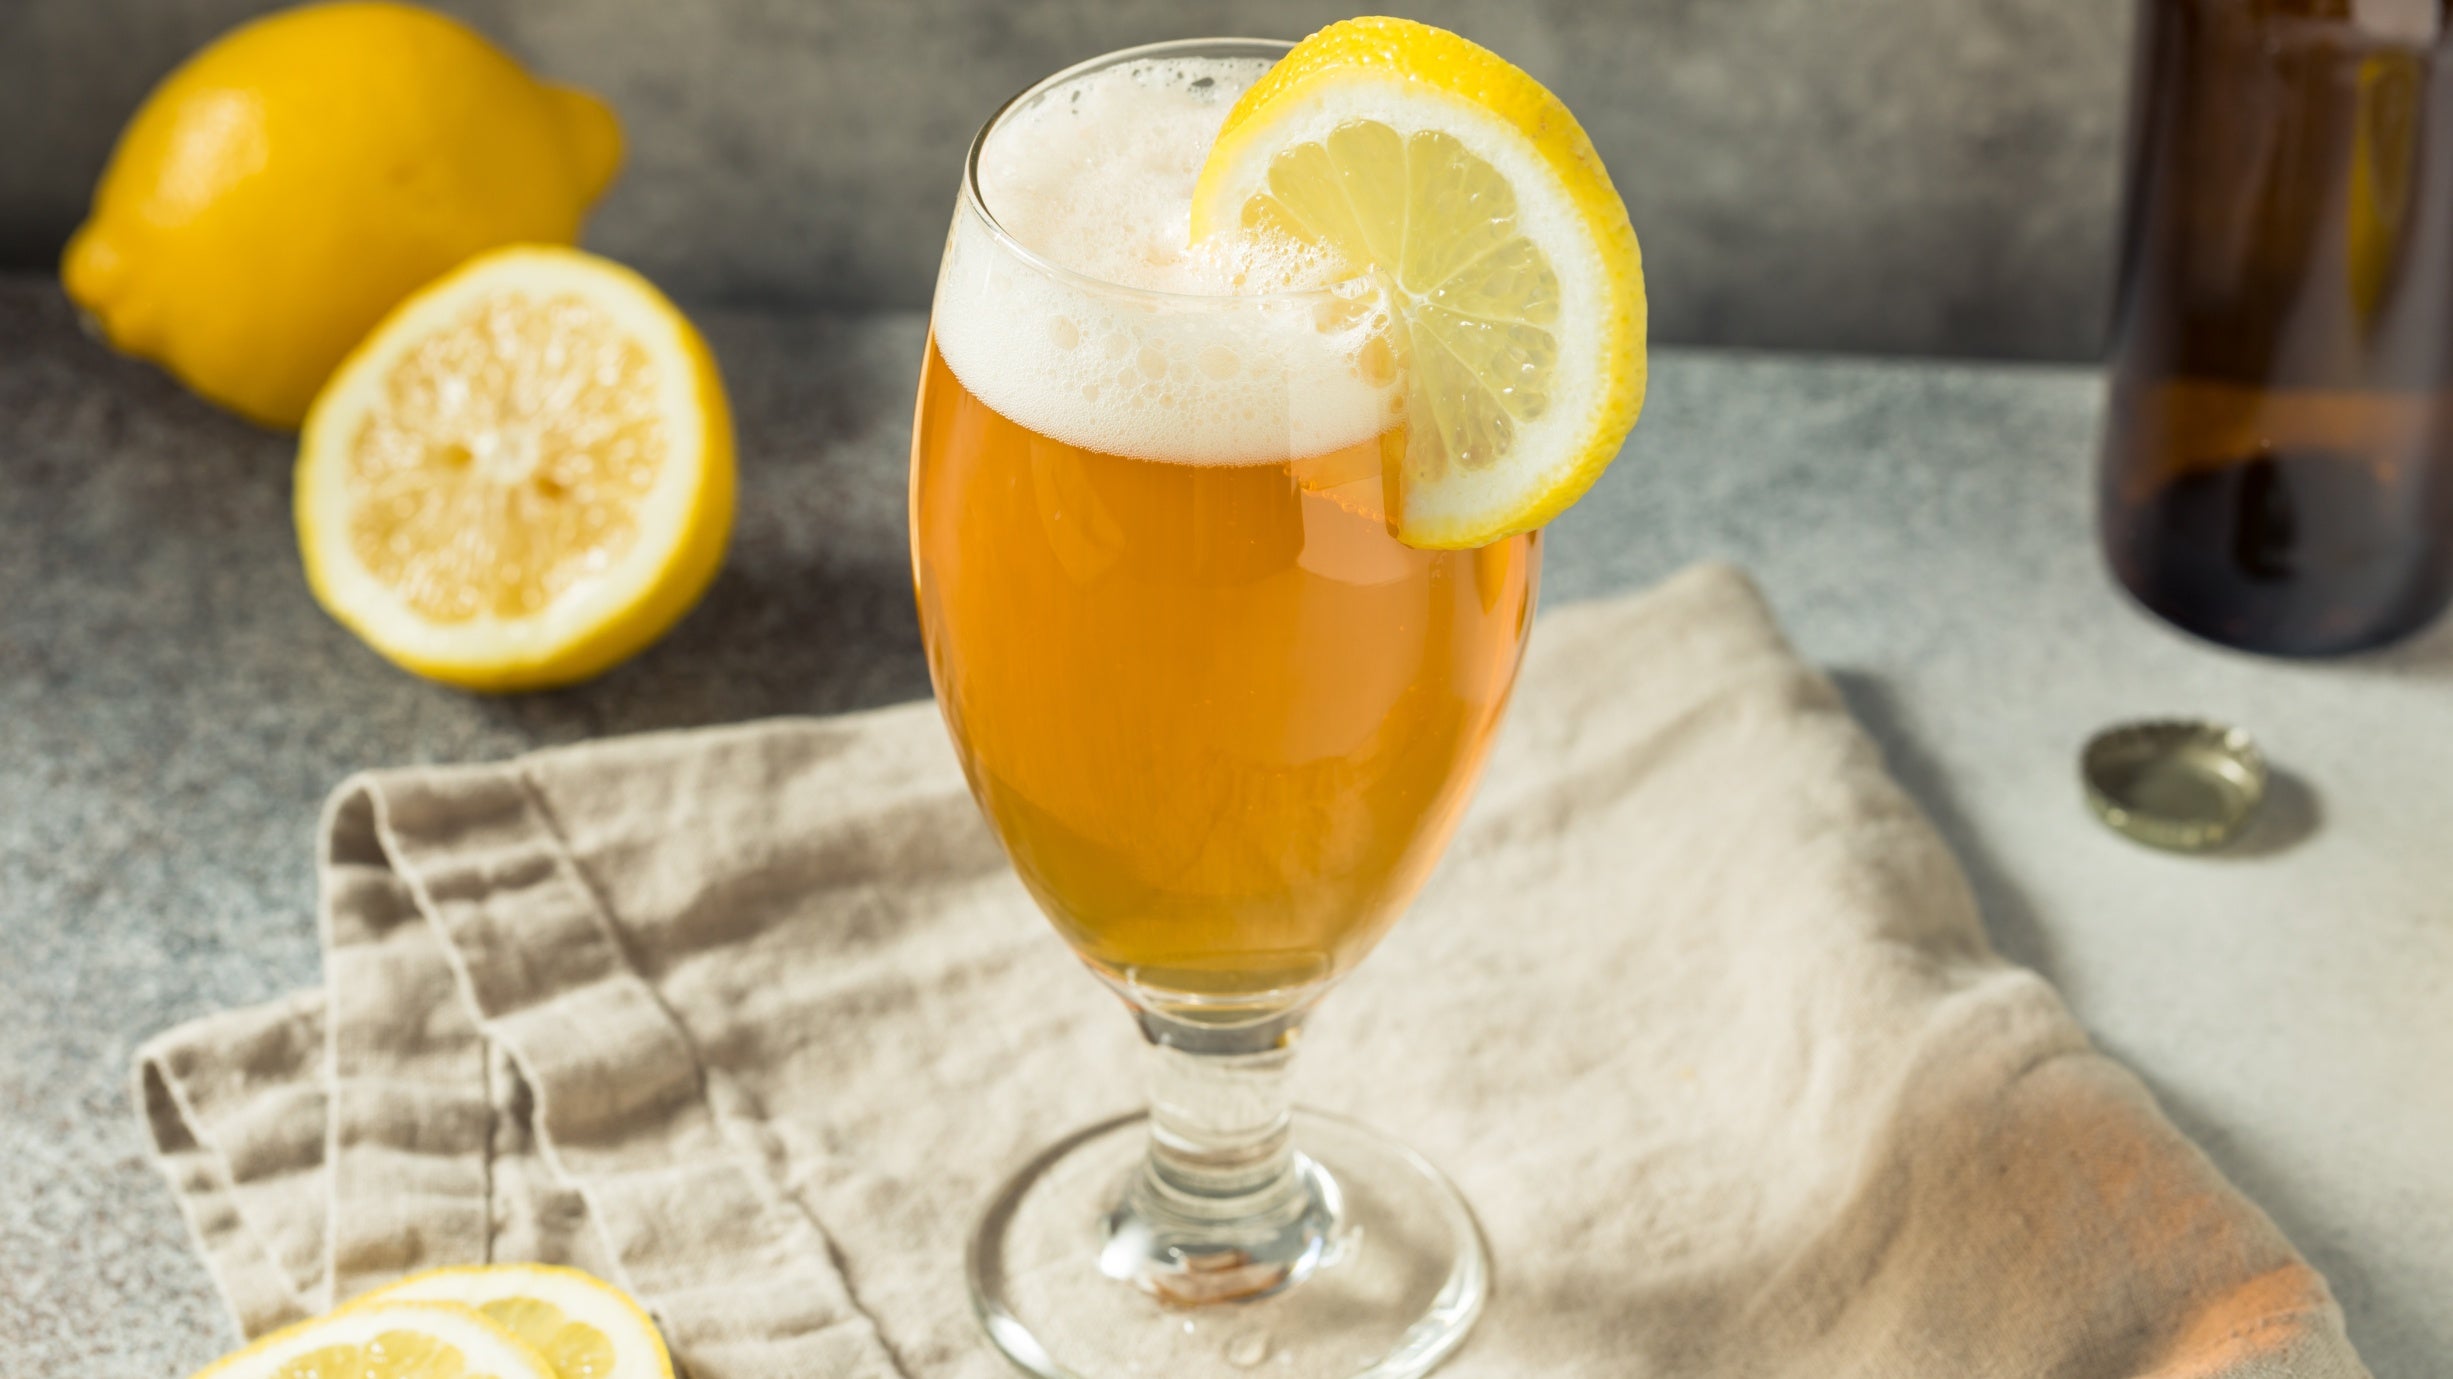 how-to-make-a-radler-shandy-a-great-citrus-beer-drink-to-beat-the-heat